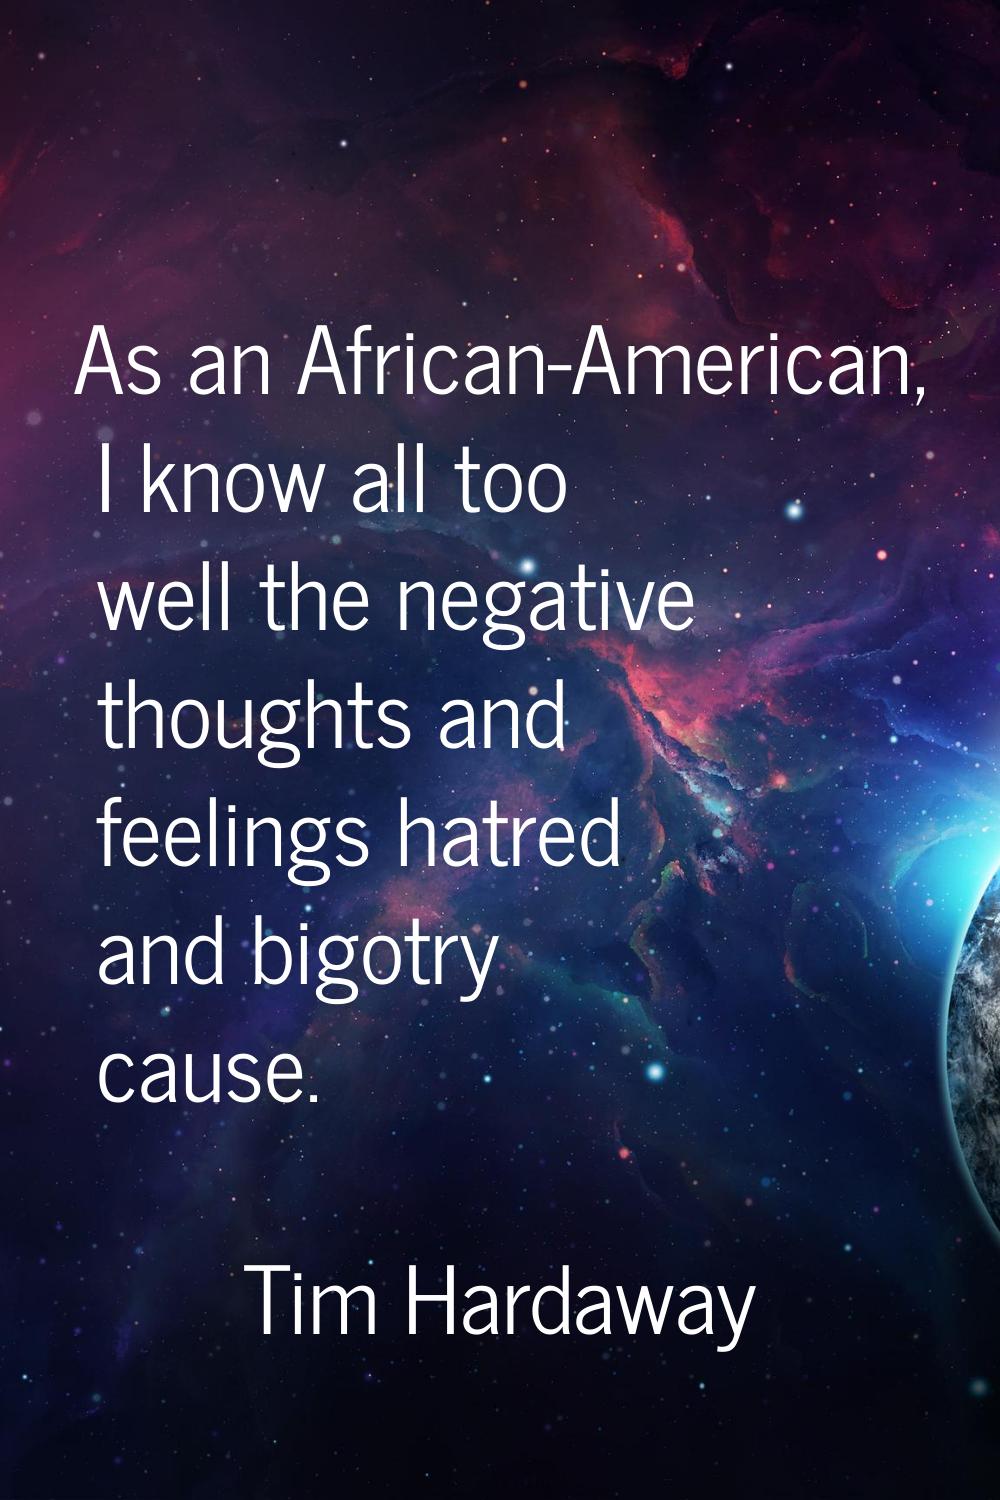 As an African-American, I know all too well the negative thoughts and feelings hatred and bigotry c